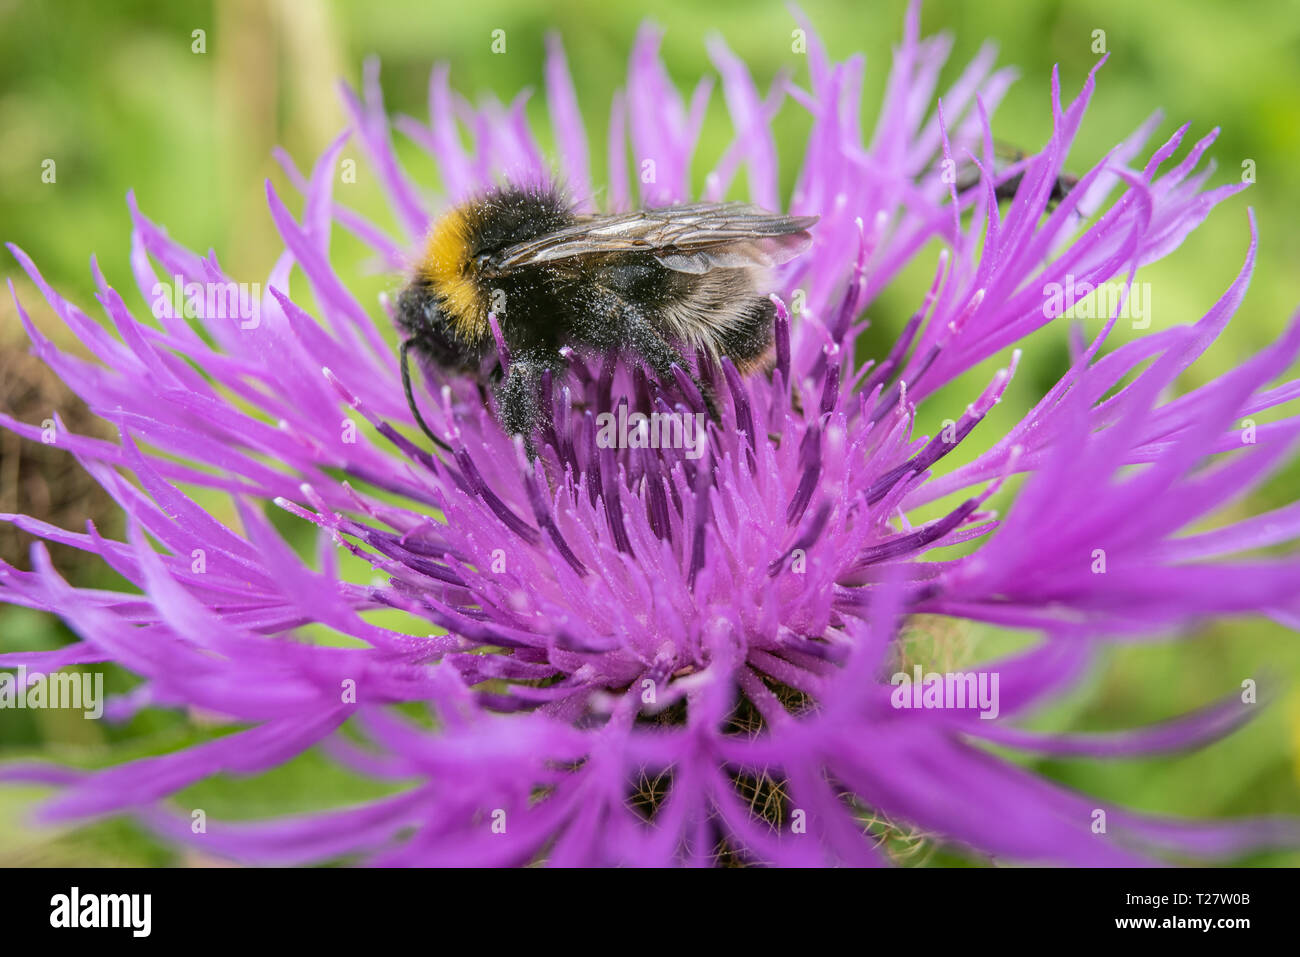 Bumble bee on a pink flower in a green field Stock Photo